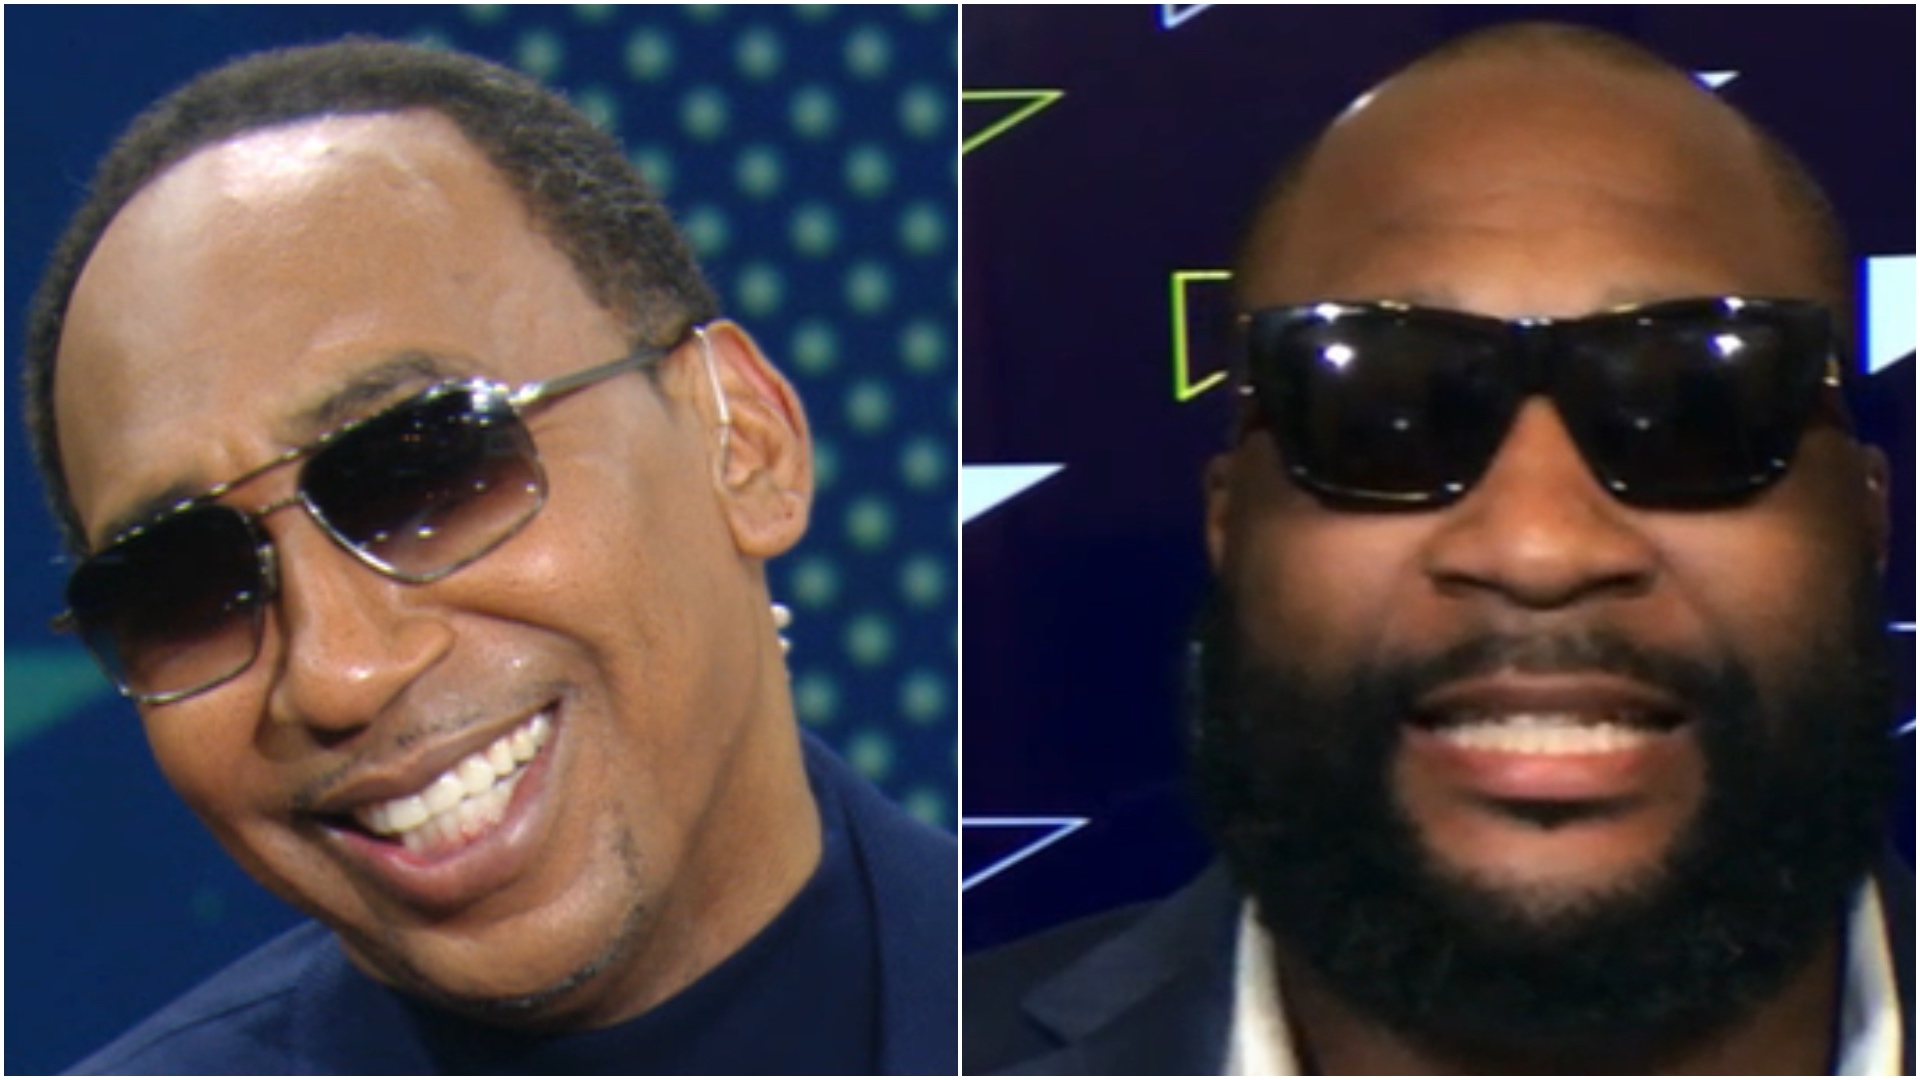 Stephen A. trolls Cowboys, Spears with sunglasses